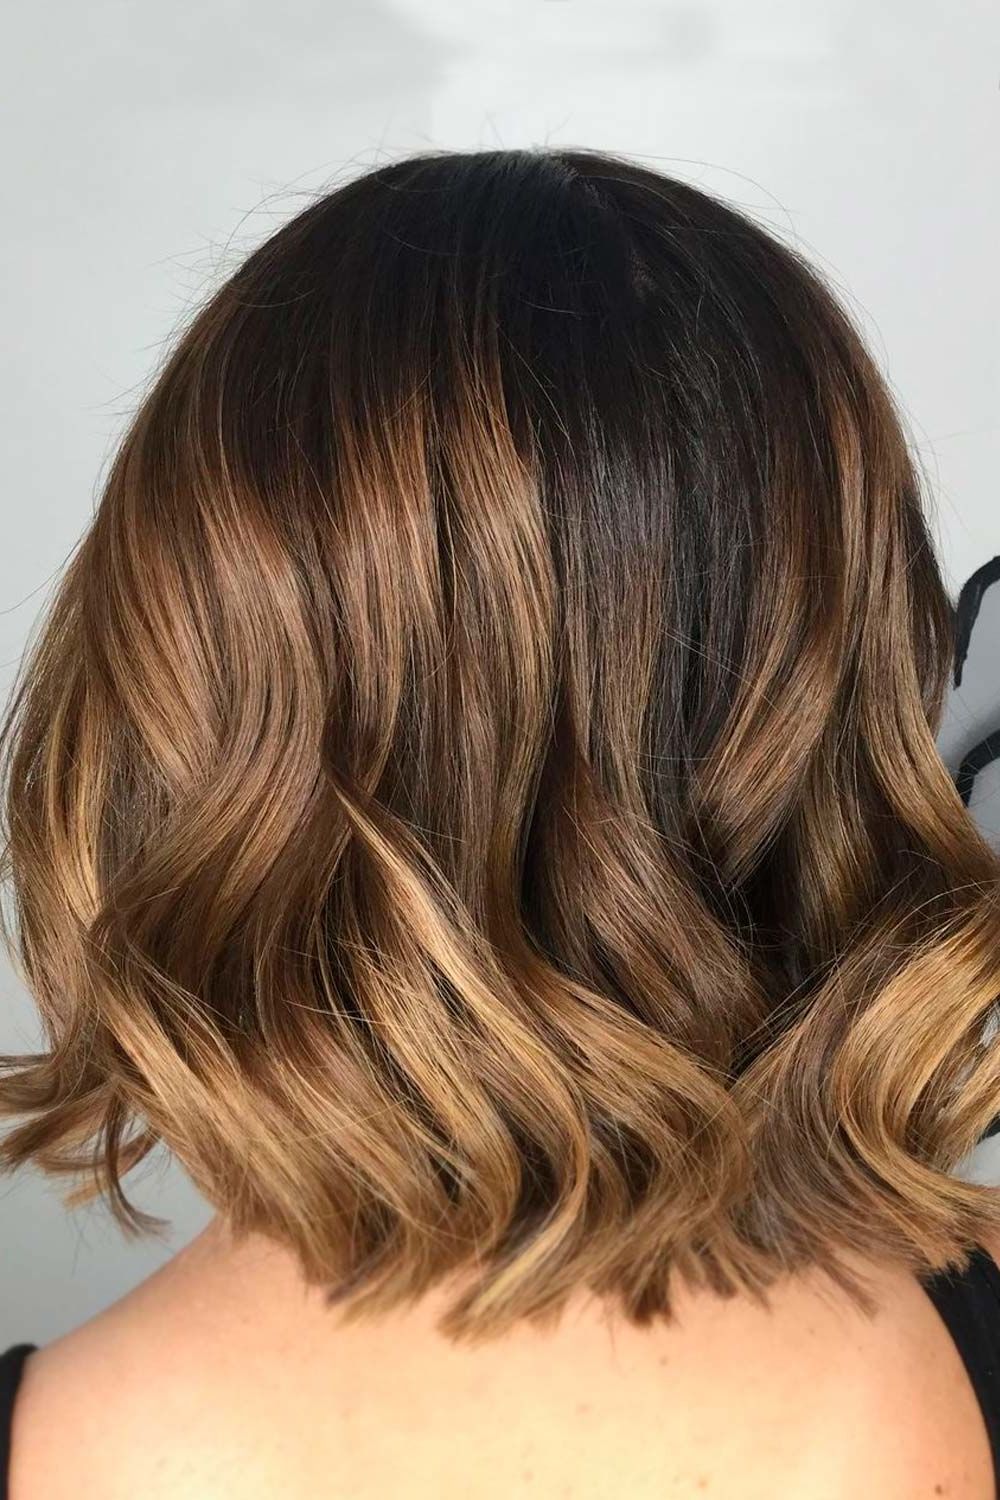 Untraditional Lob Haircut Ideas To Give A Try (View 9 of 20)